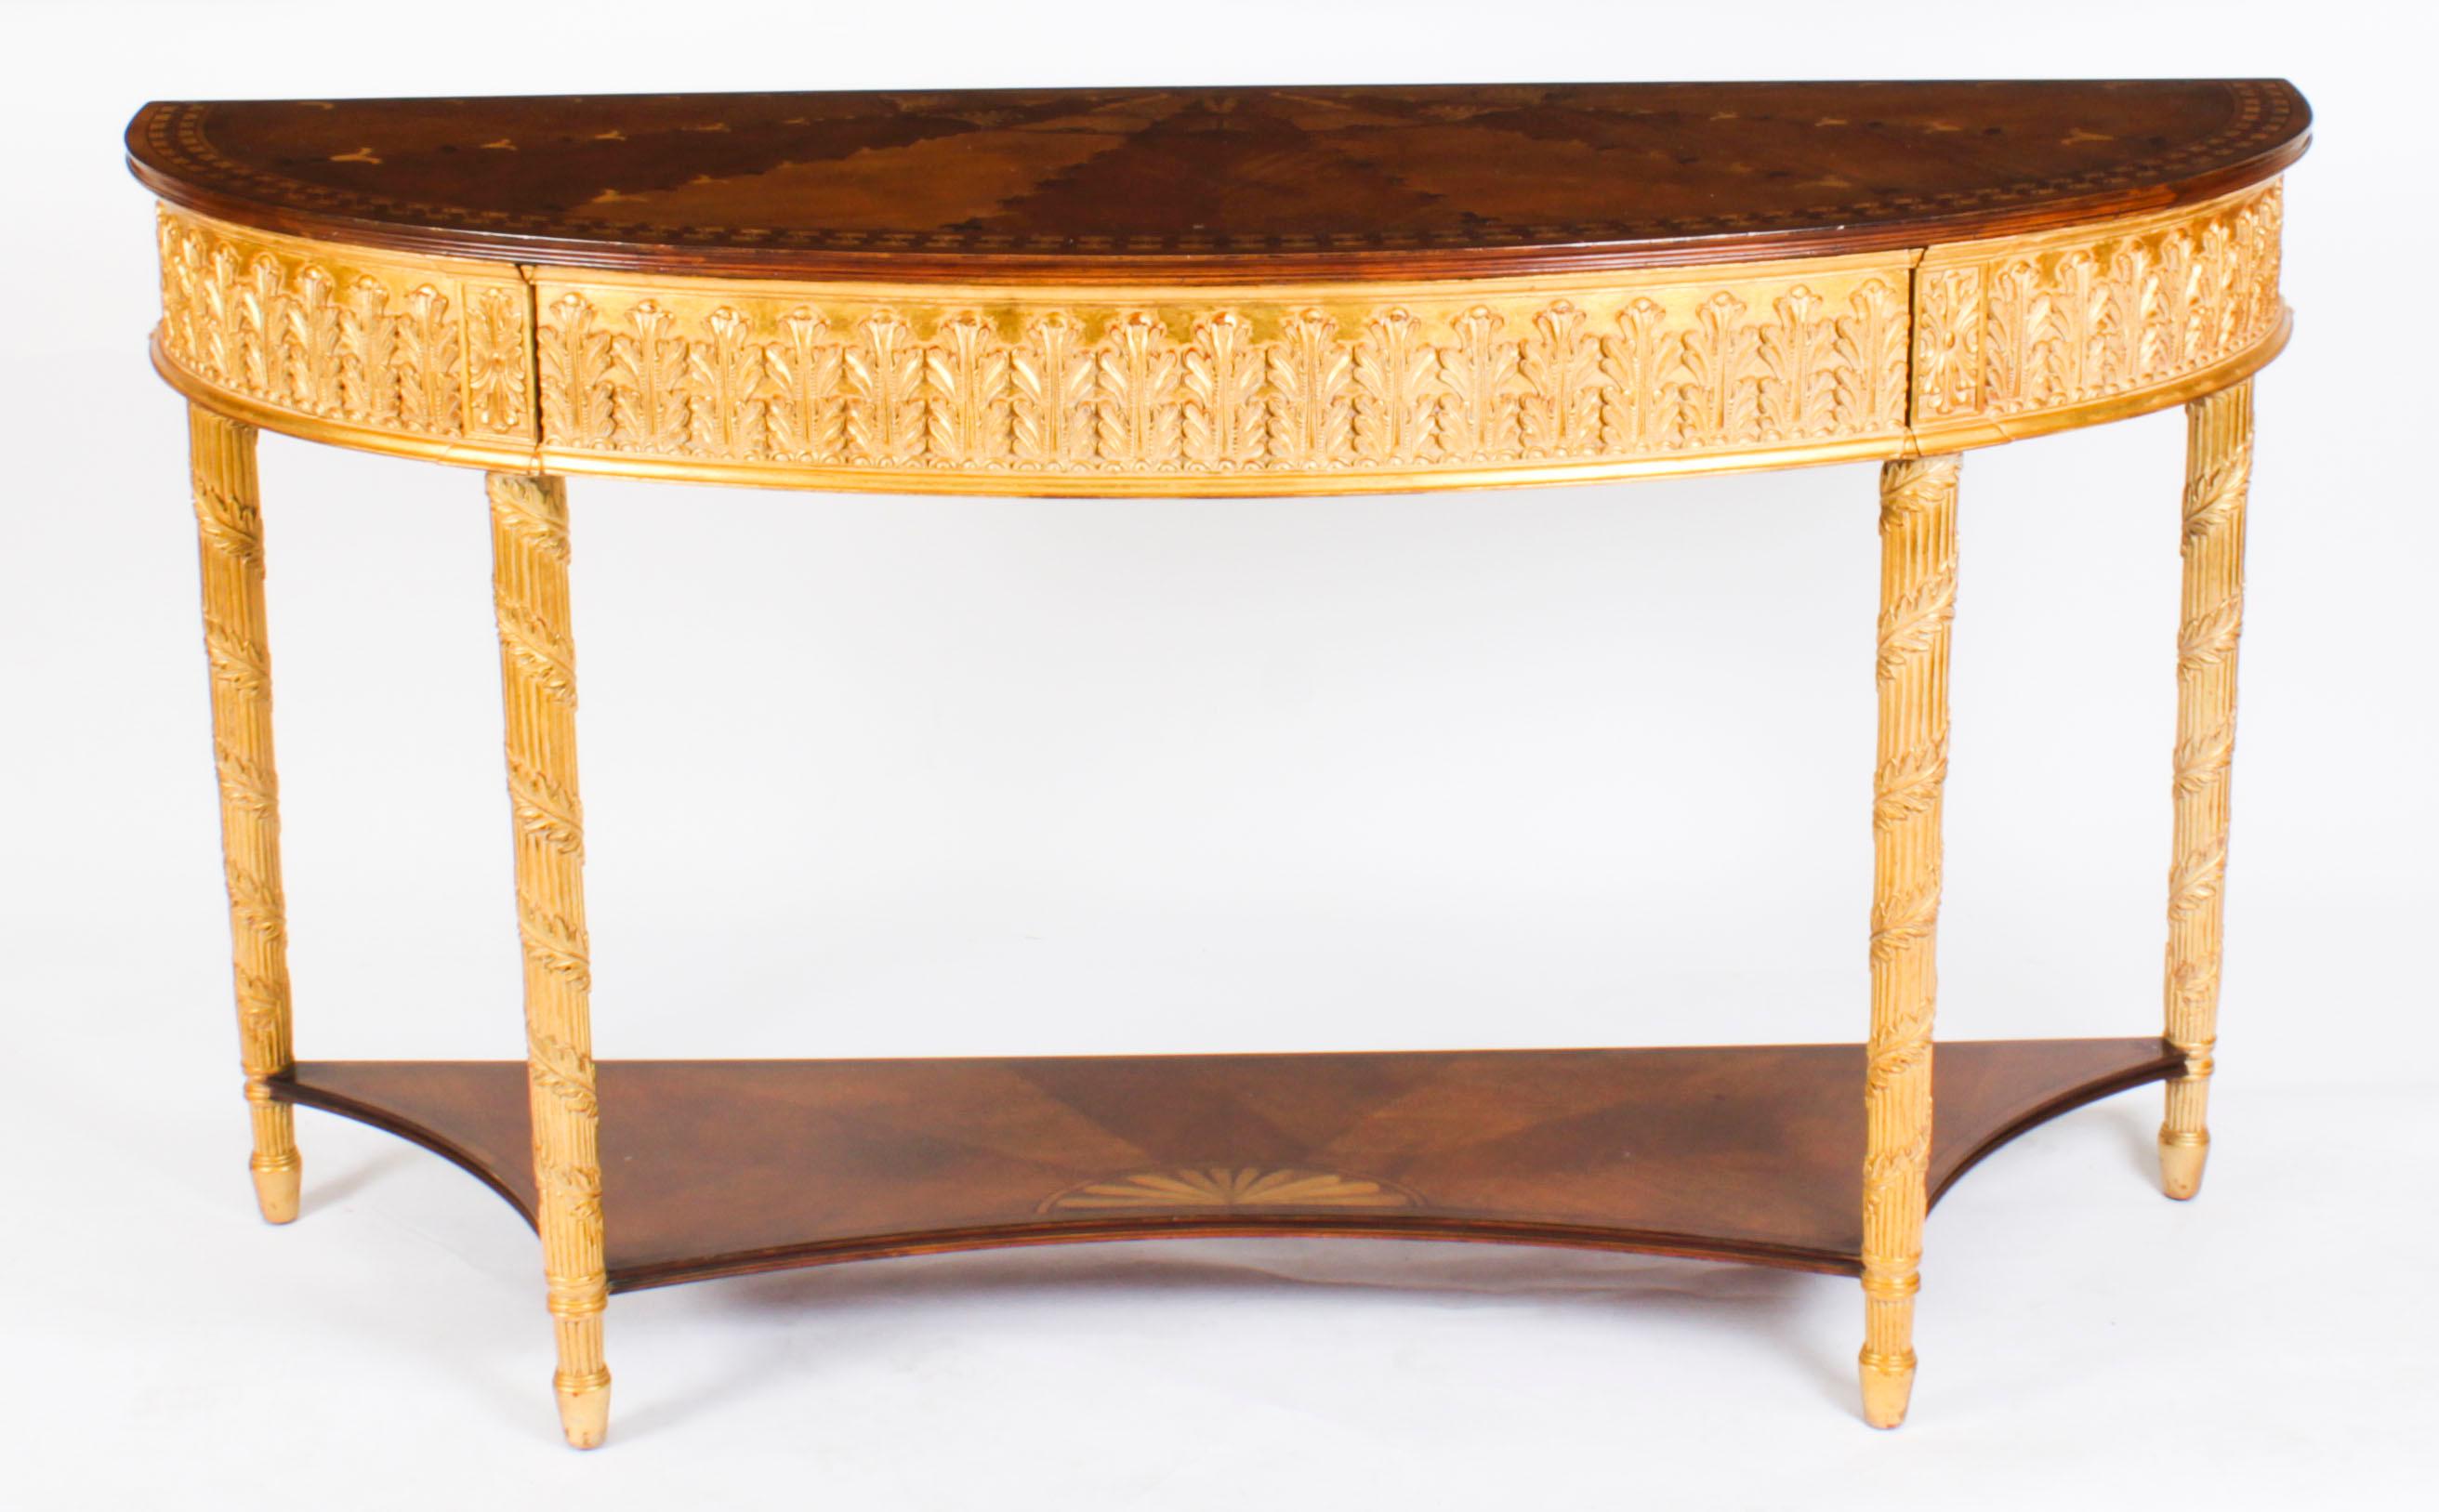 This is an elegant Vintage Sheraton Revival parcel gilt and marquetry console table dating from the second half of the 20th century.

This magnificent piece is crafted from walnut, the top is richly inlaid with a marquetry of flowerbells and